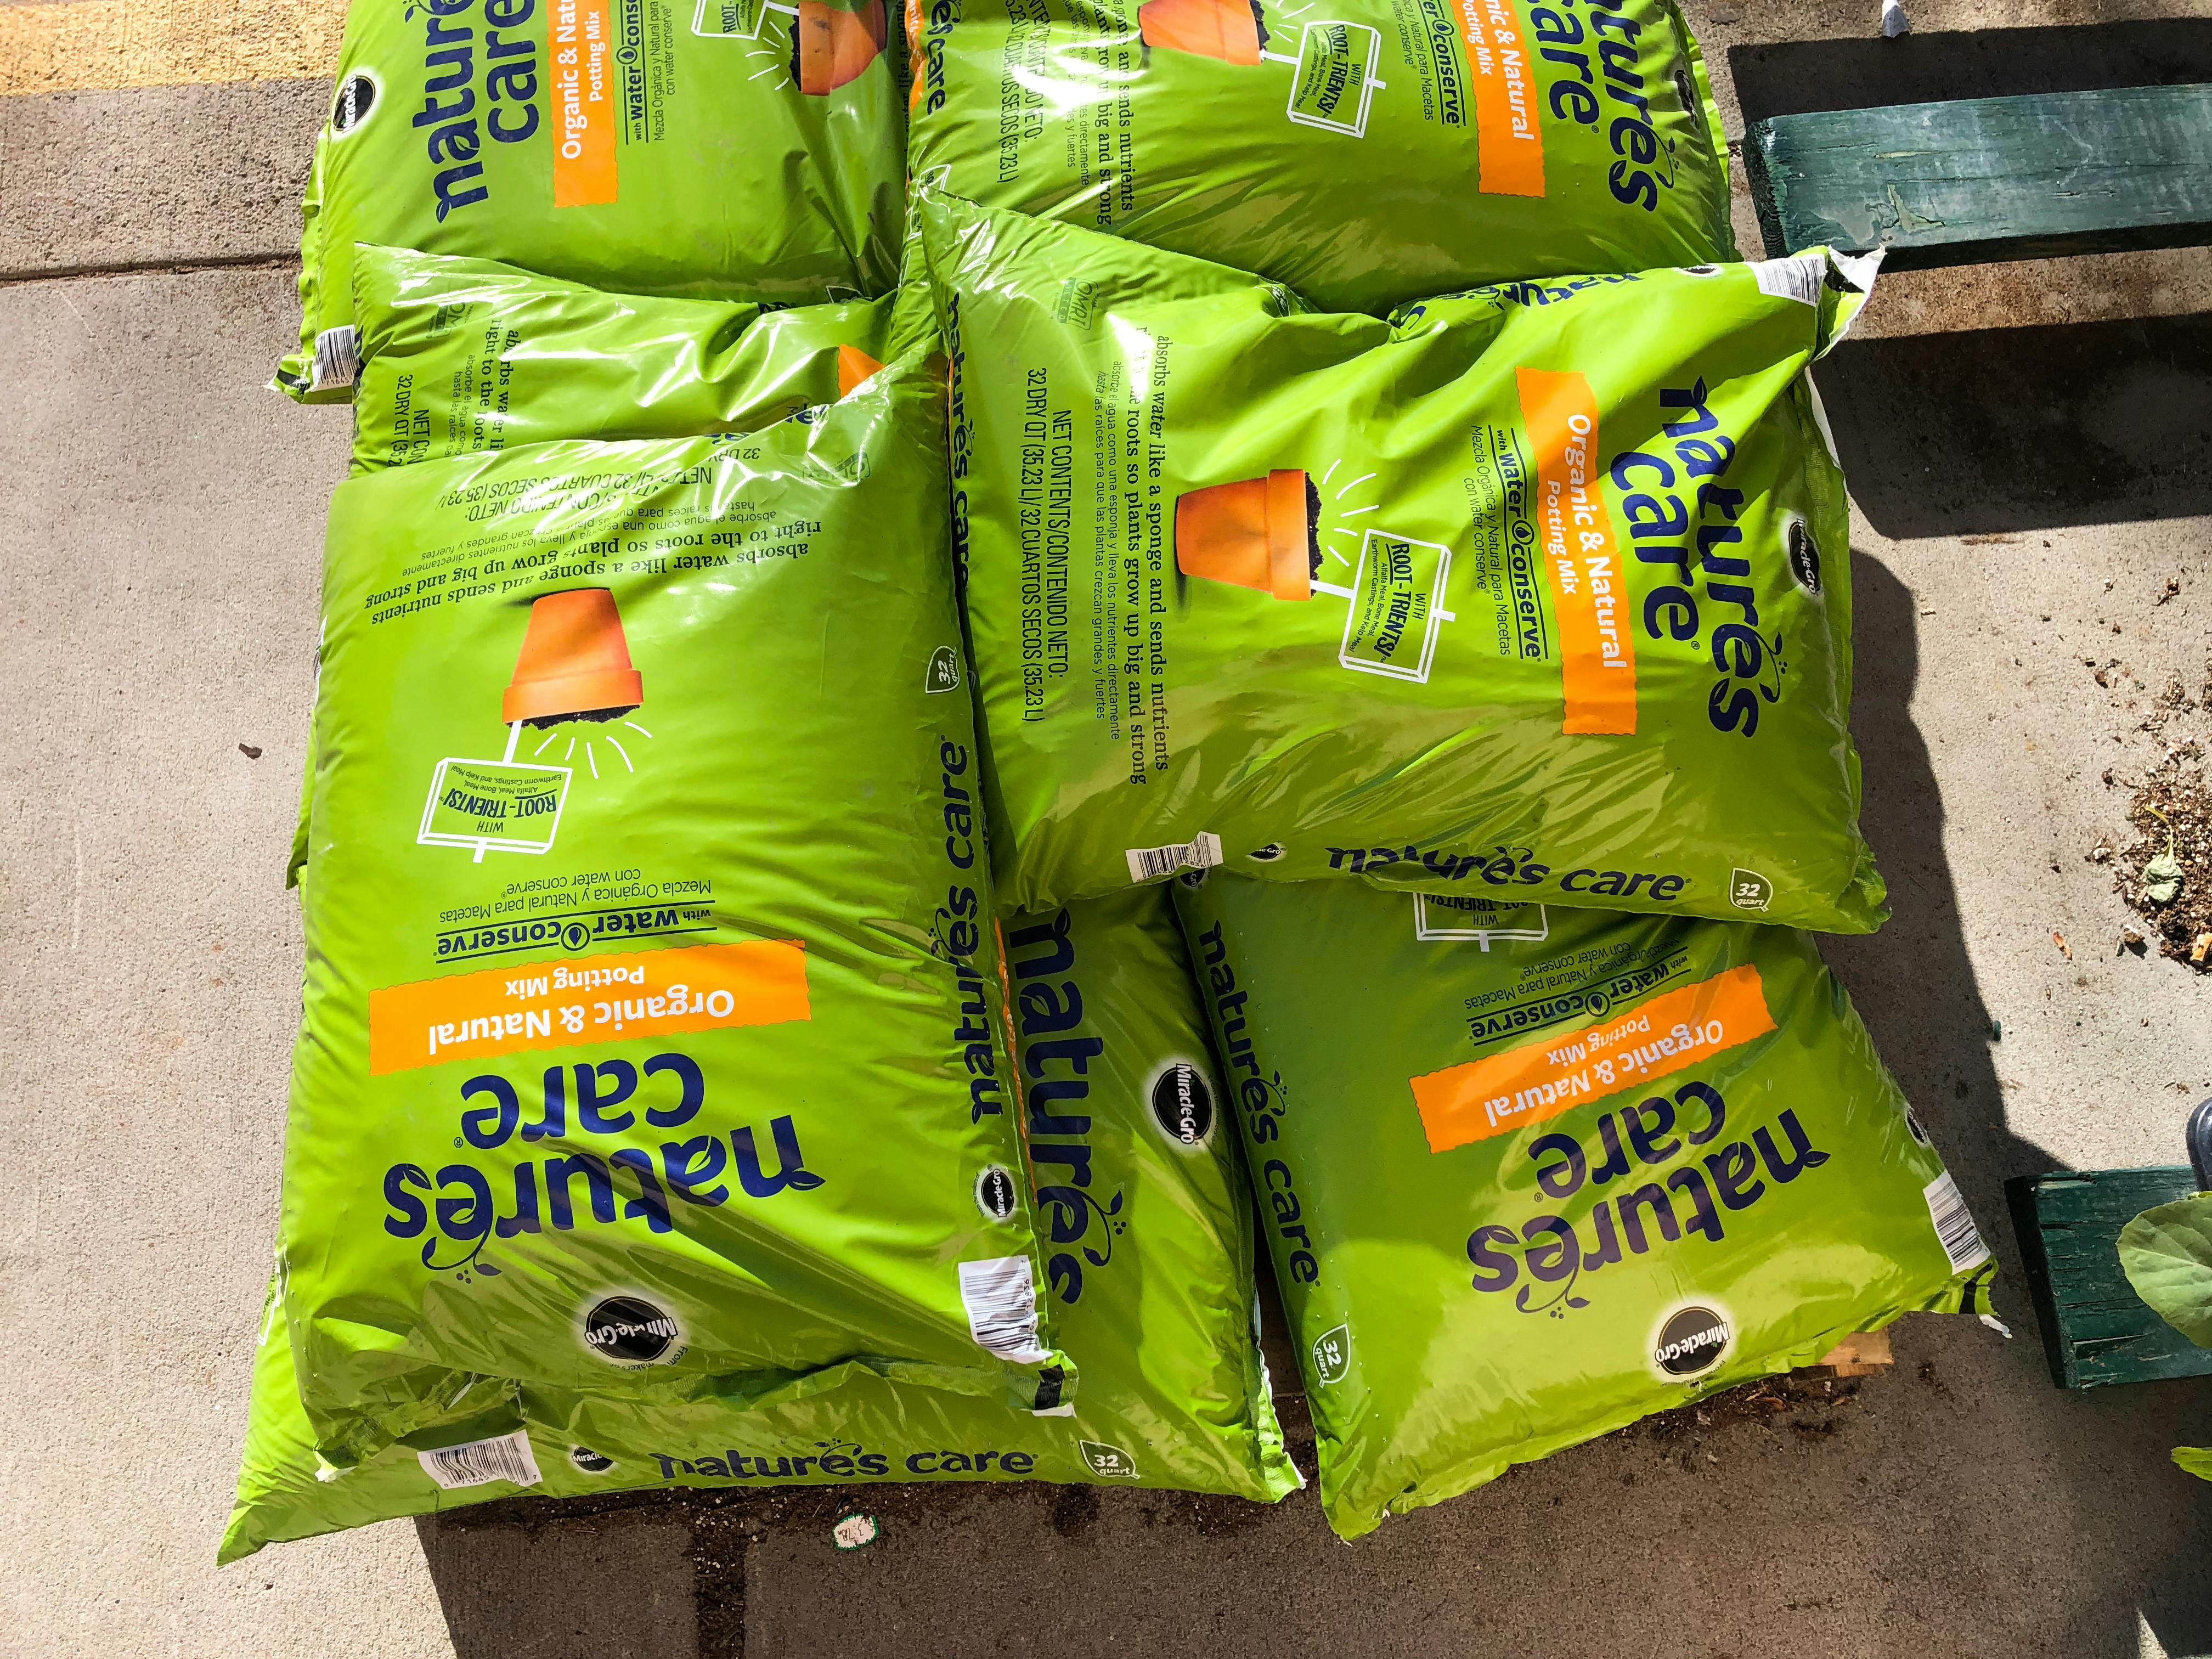 Organic soil in a pile at Home Depot.